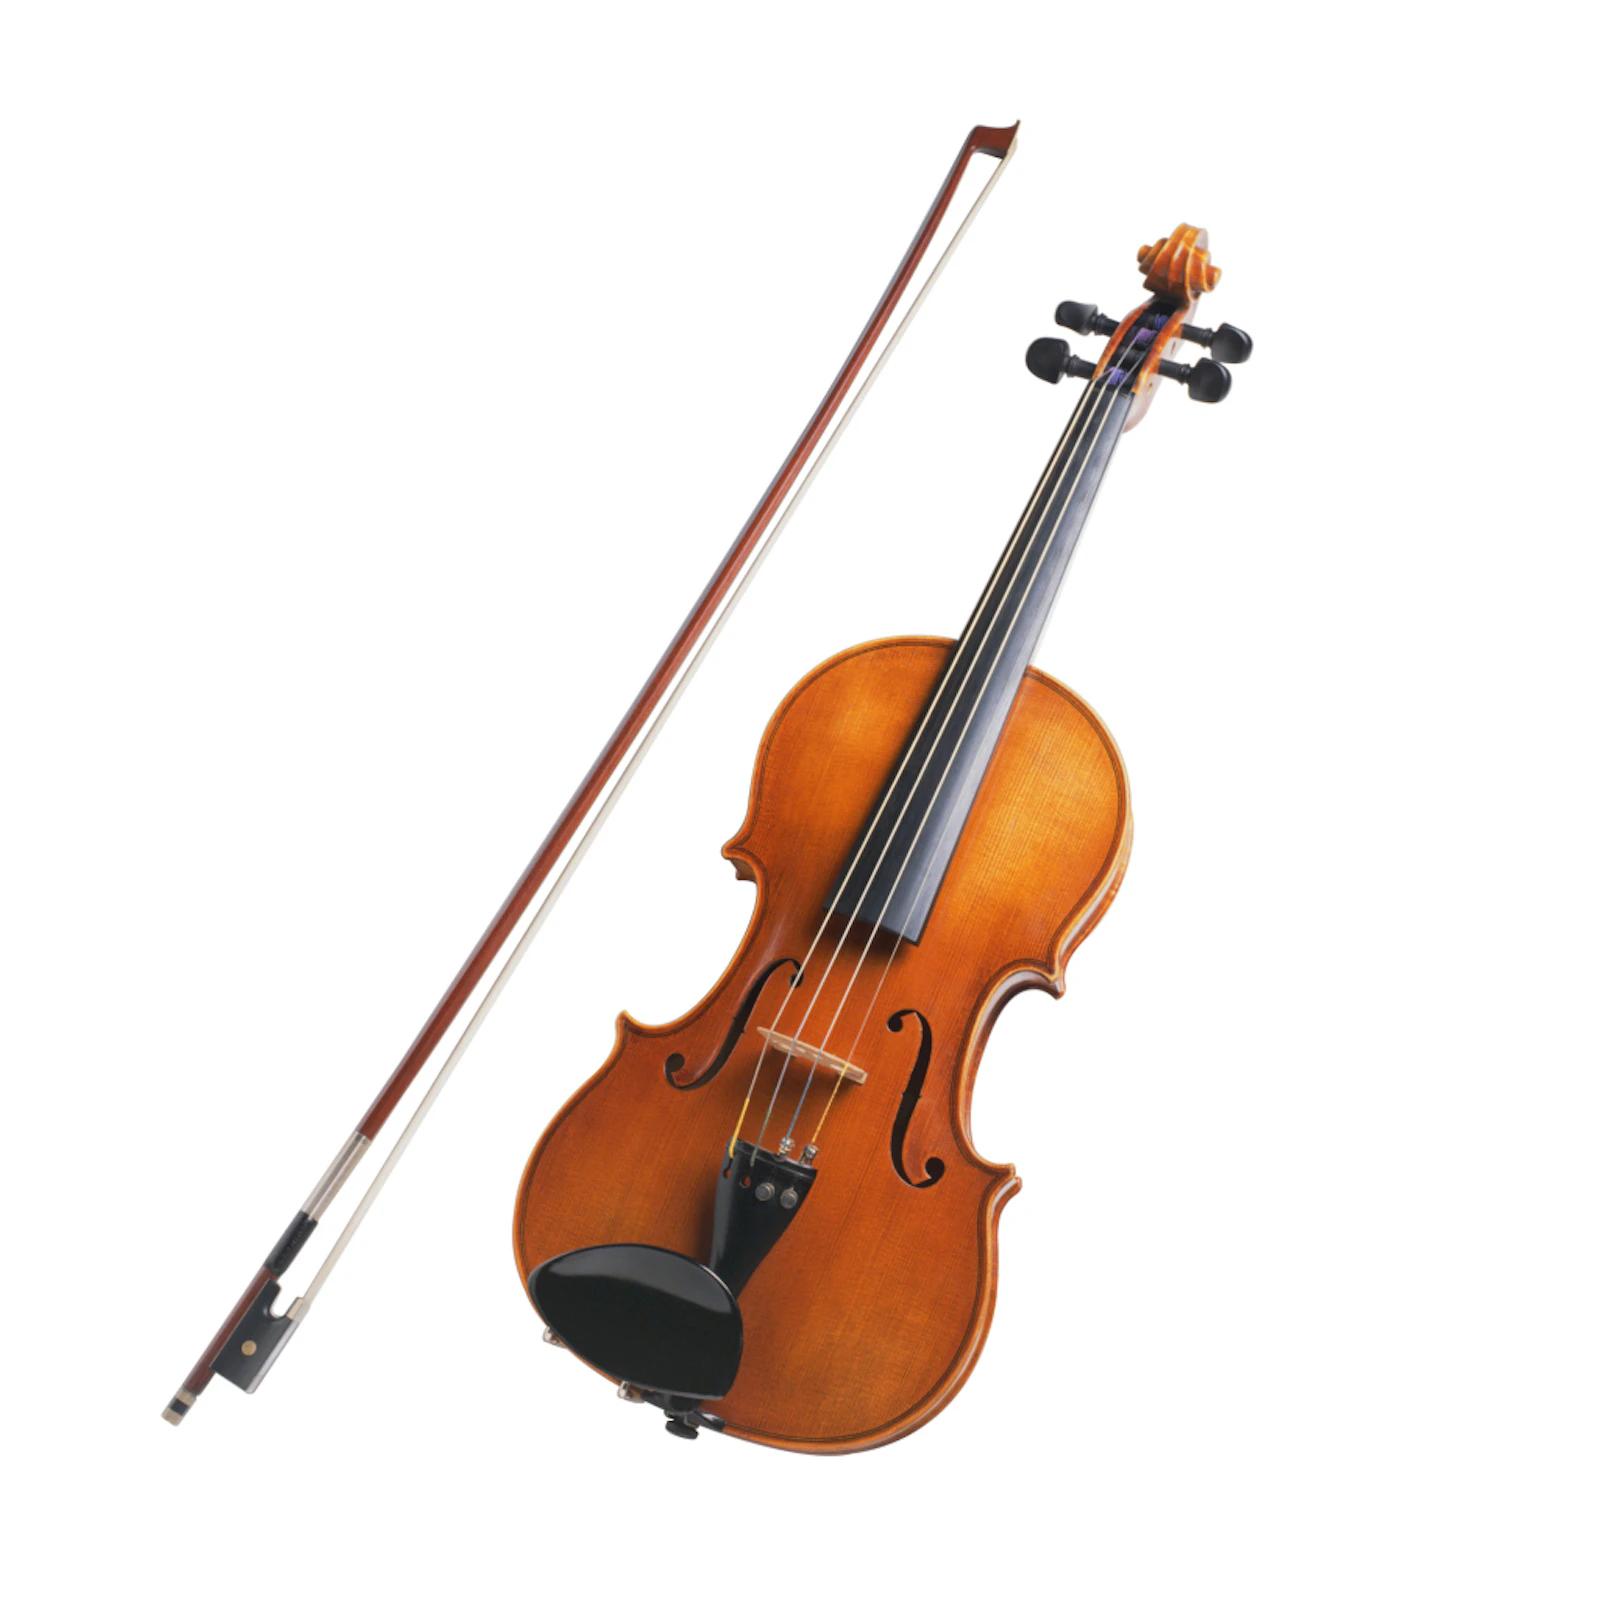 a violin is an example of a string instrument - Is the violin an example of an instrument